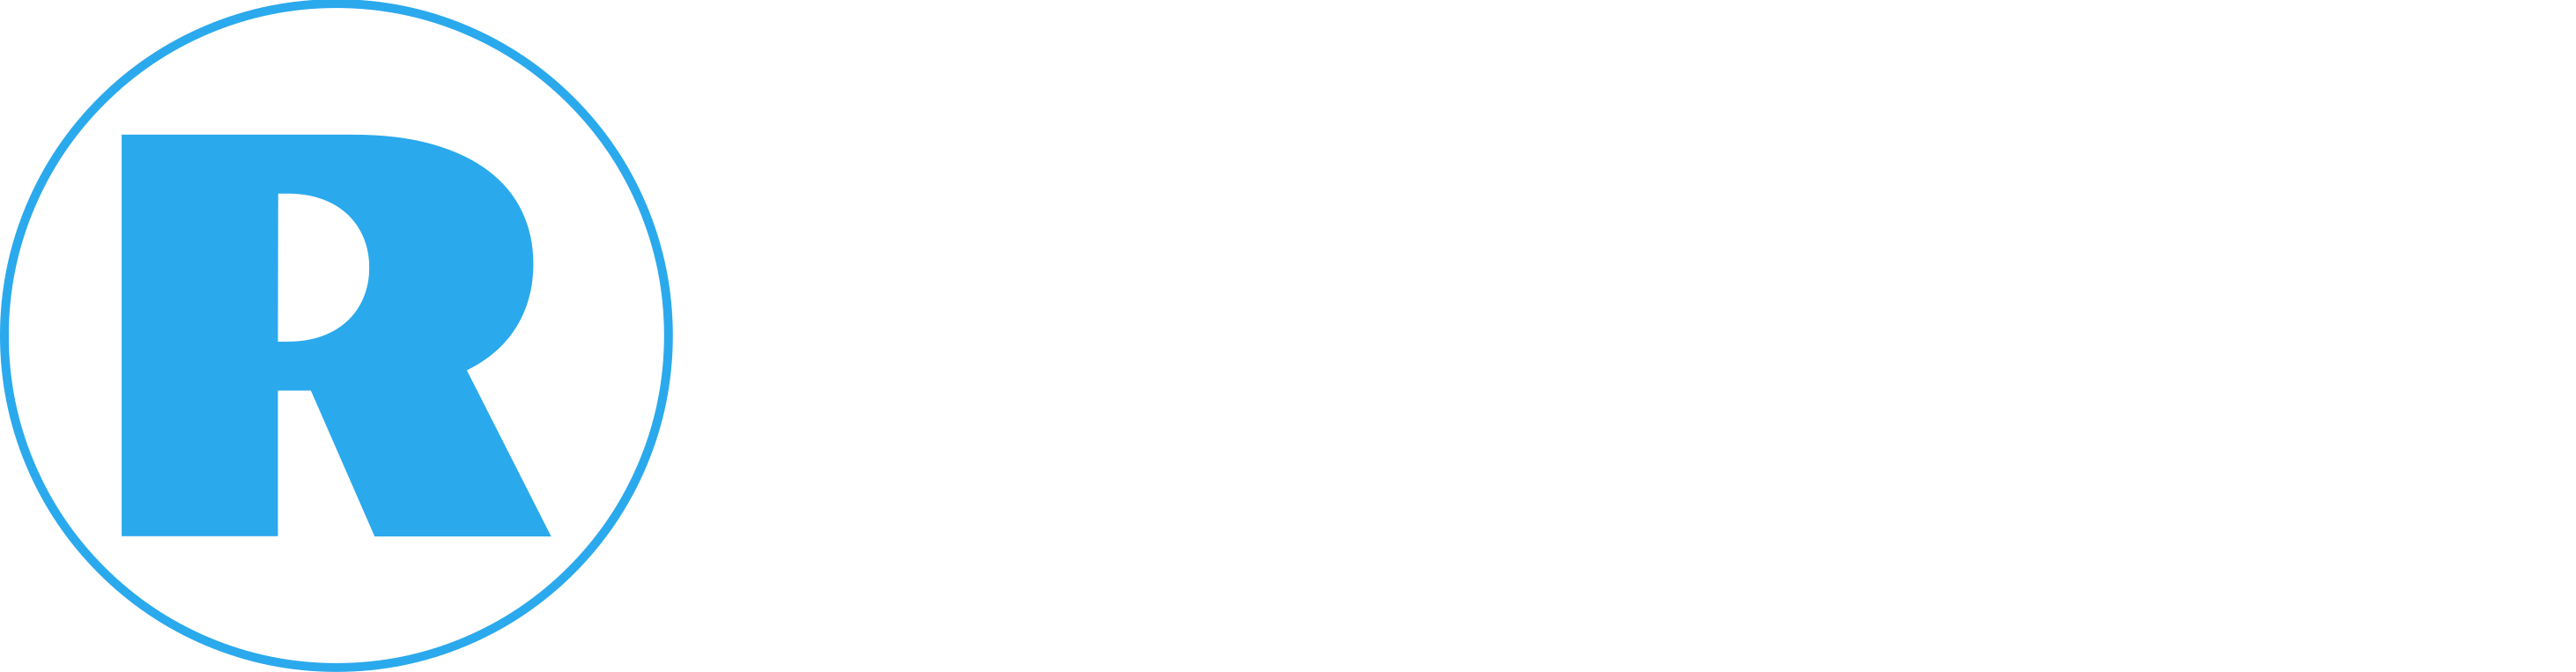 Real View – Sell the Reality